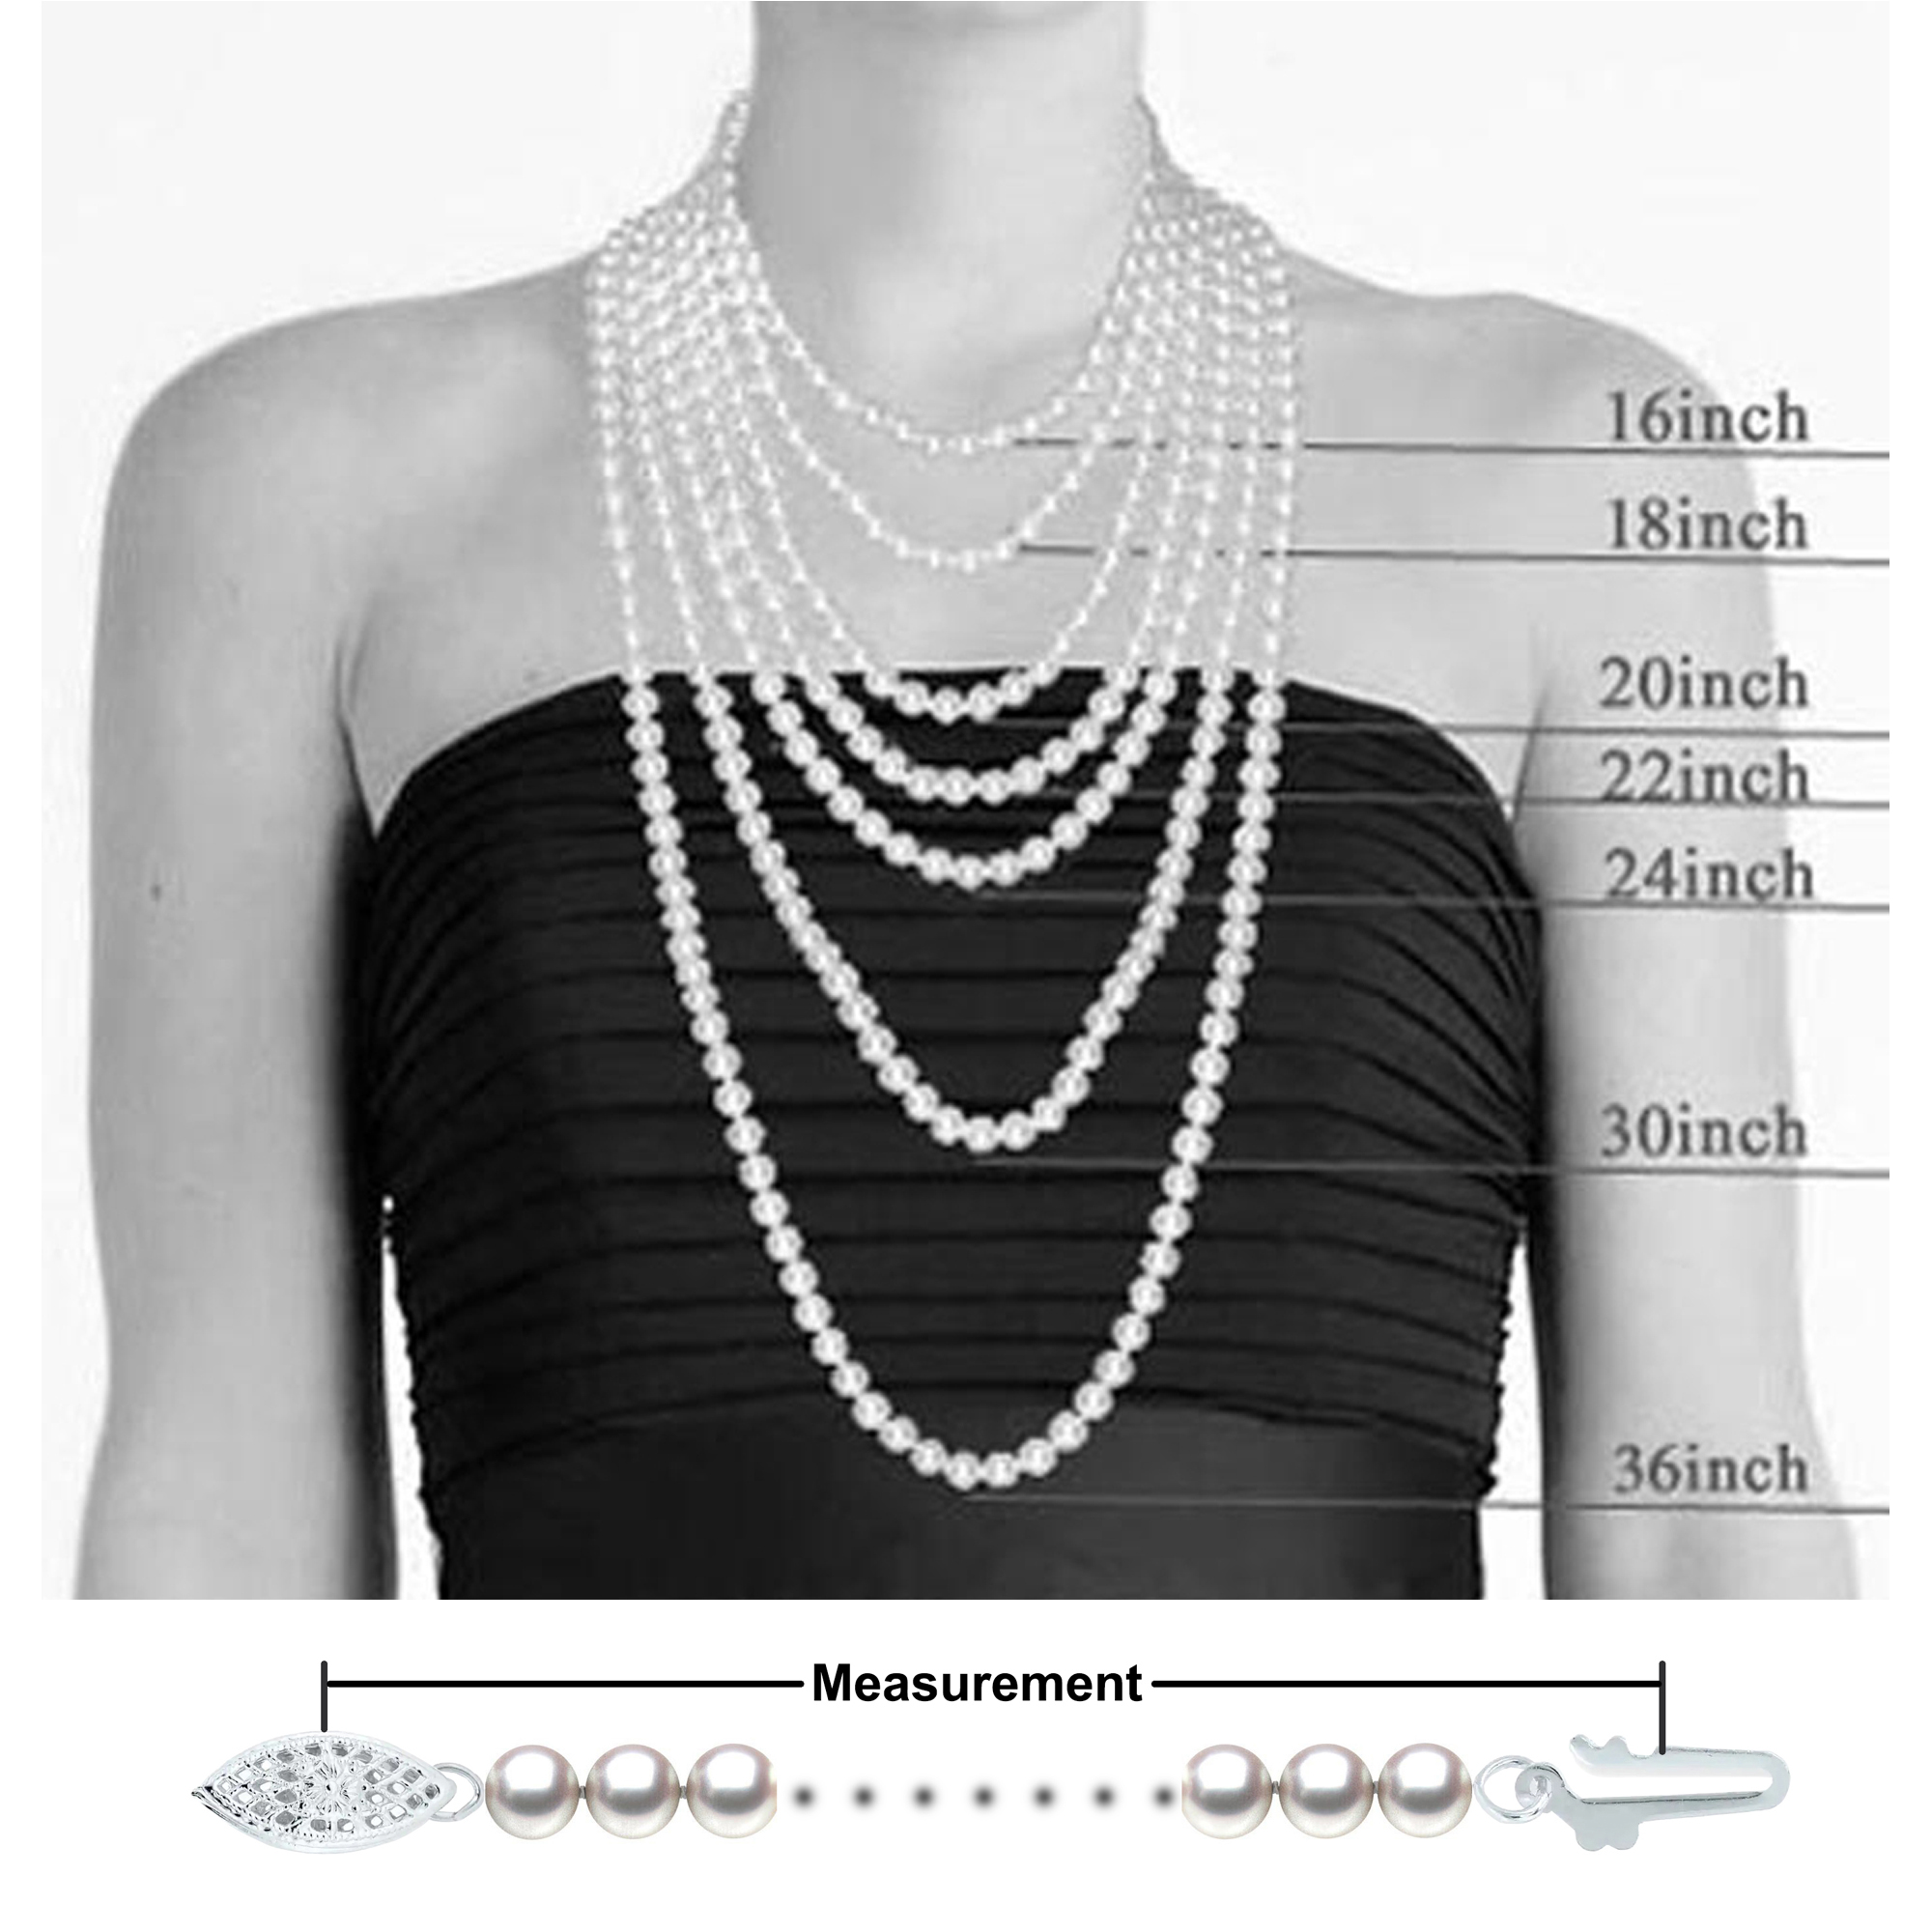 Orien Jewelry AAAA Japanese Akoya Pearl Necklace Sterling Silver Clasp at 16, 18 or 22 Inch Long Black Pearl Necklace Jewelry Sets for Women 